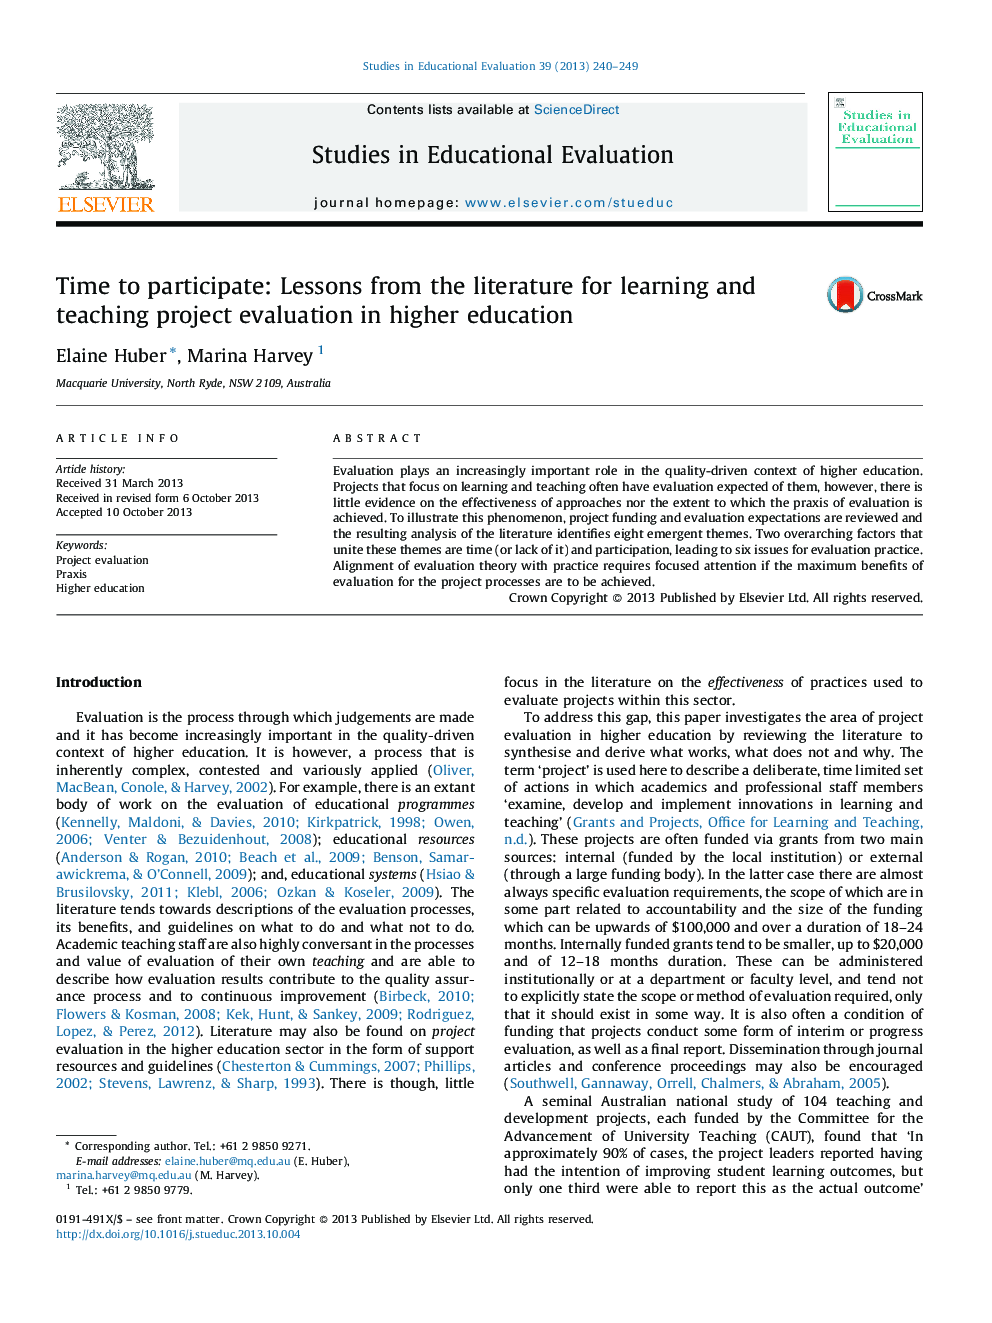 Time to participate: Lessons from the literature for learning and teaching project evaluation in higher education